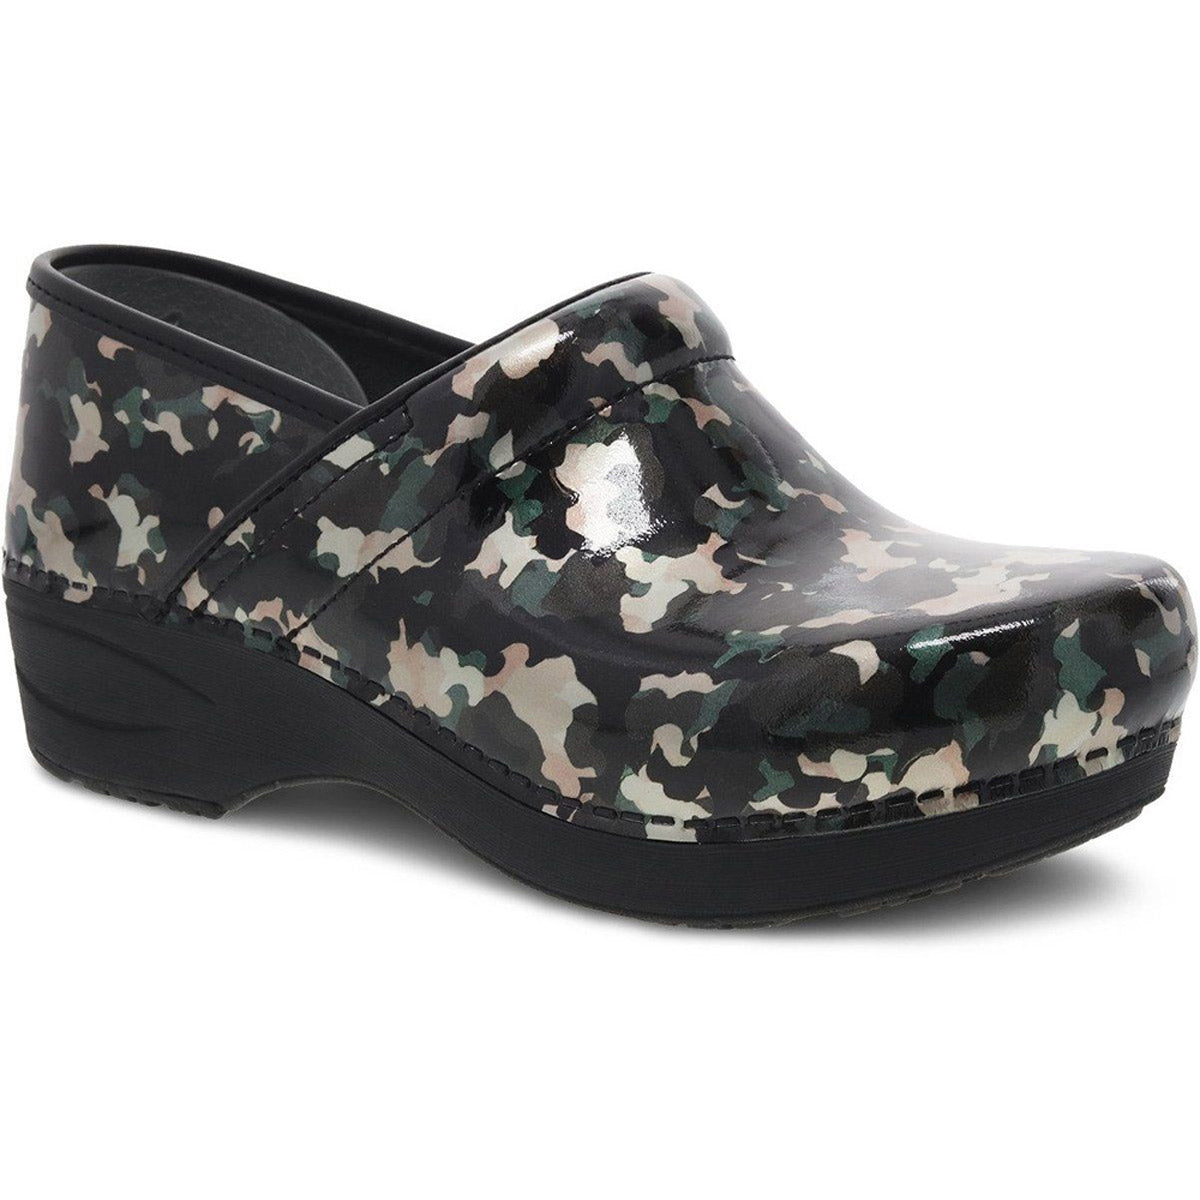 A single patterned clog shoe with a black and white camouflage design, featuring a thick sole, closed heel and toe, and an ergonomic footbed. Enjoy the added security of a slip-resistant outsole with the stylish DANSKO PRO XP 2.0 CAMO PATENT - WOMENS by Dansko.